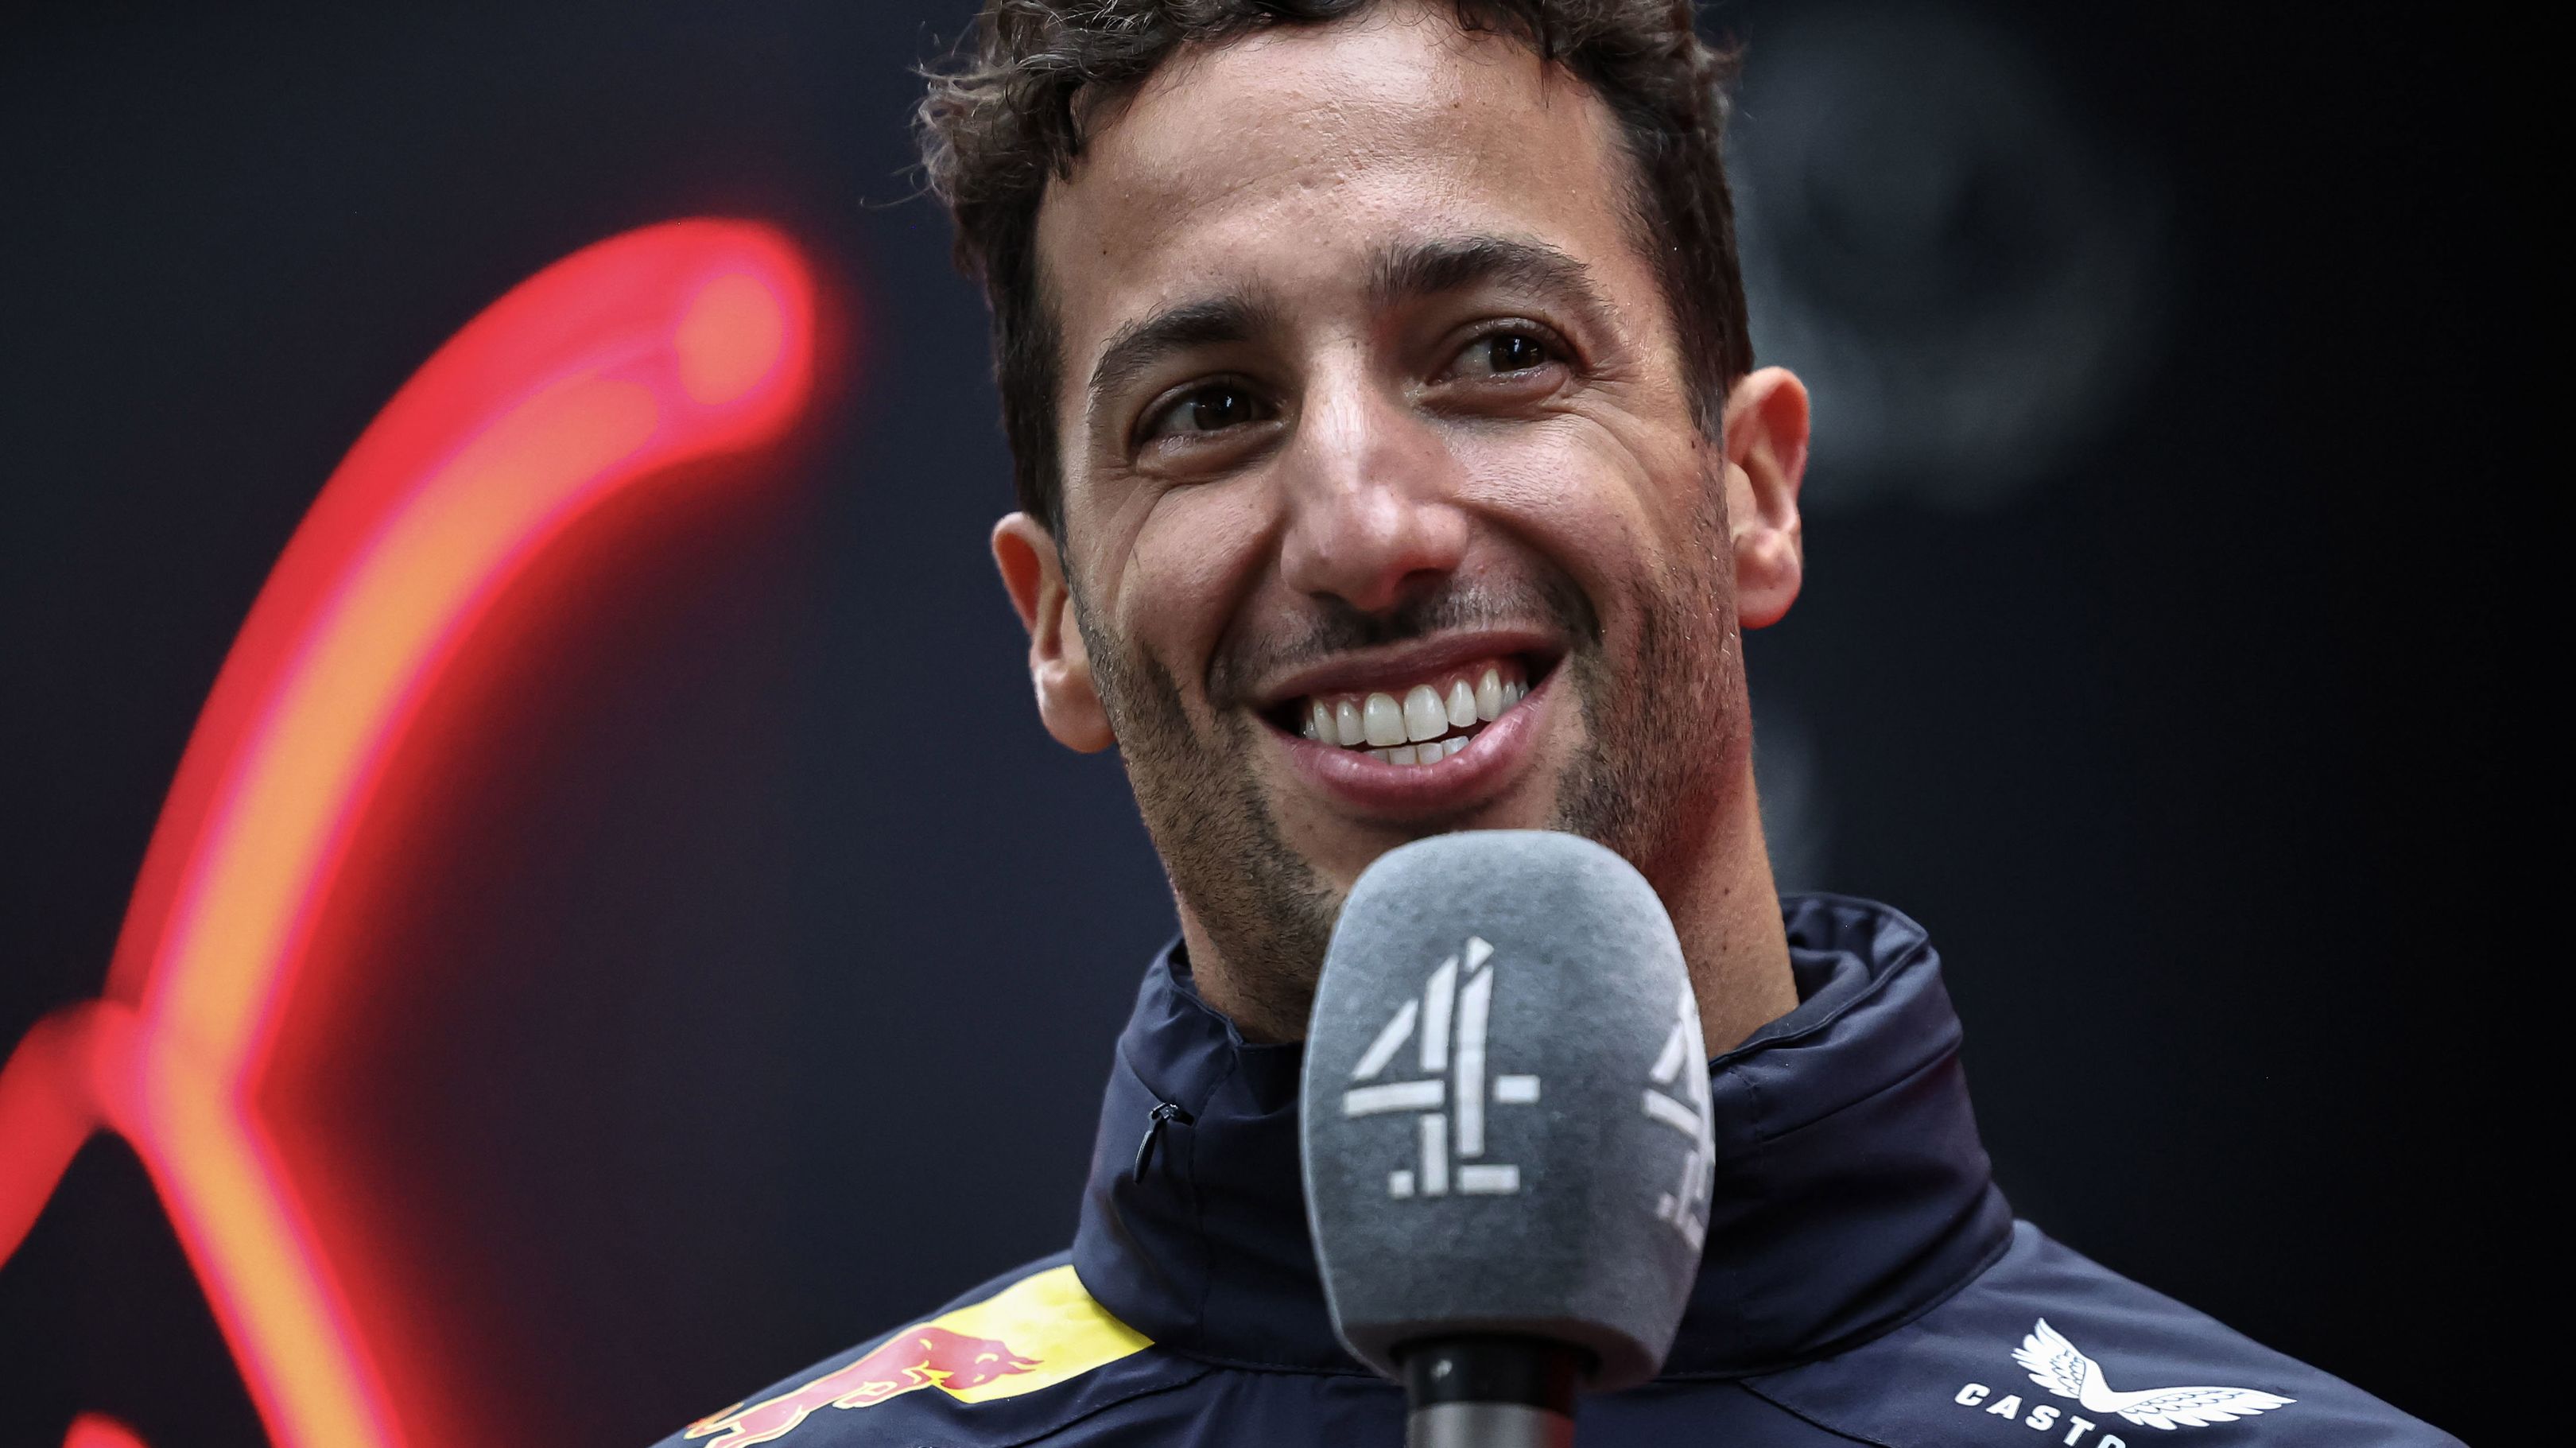 Daniel Ricciardo of Oracle Red Bull Racing during qualifying ahead of the F1 Grand Prix of Australia at Melbourne Grand Prix Circuit on April 1, 2023 in Melbourne, Australia. (Photo by Qian Jun/MB Media/Getty Images)